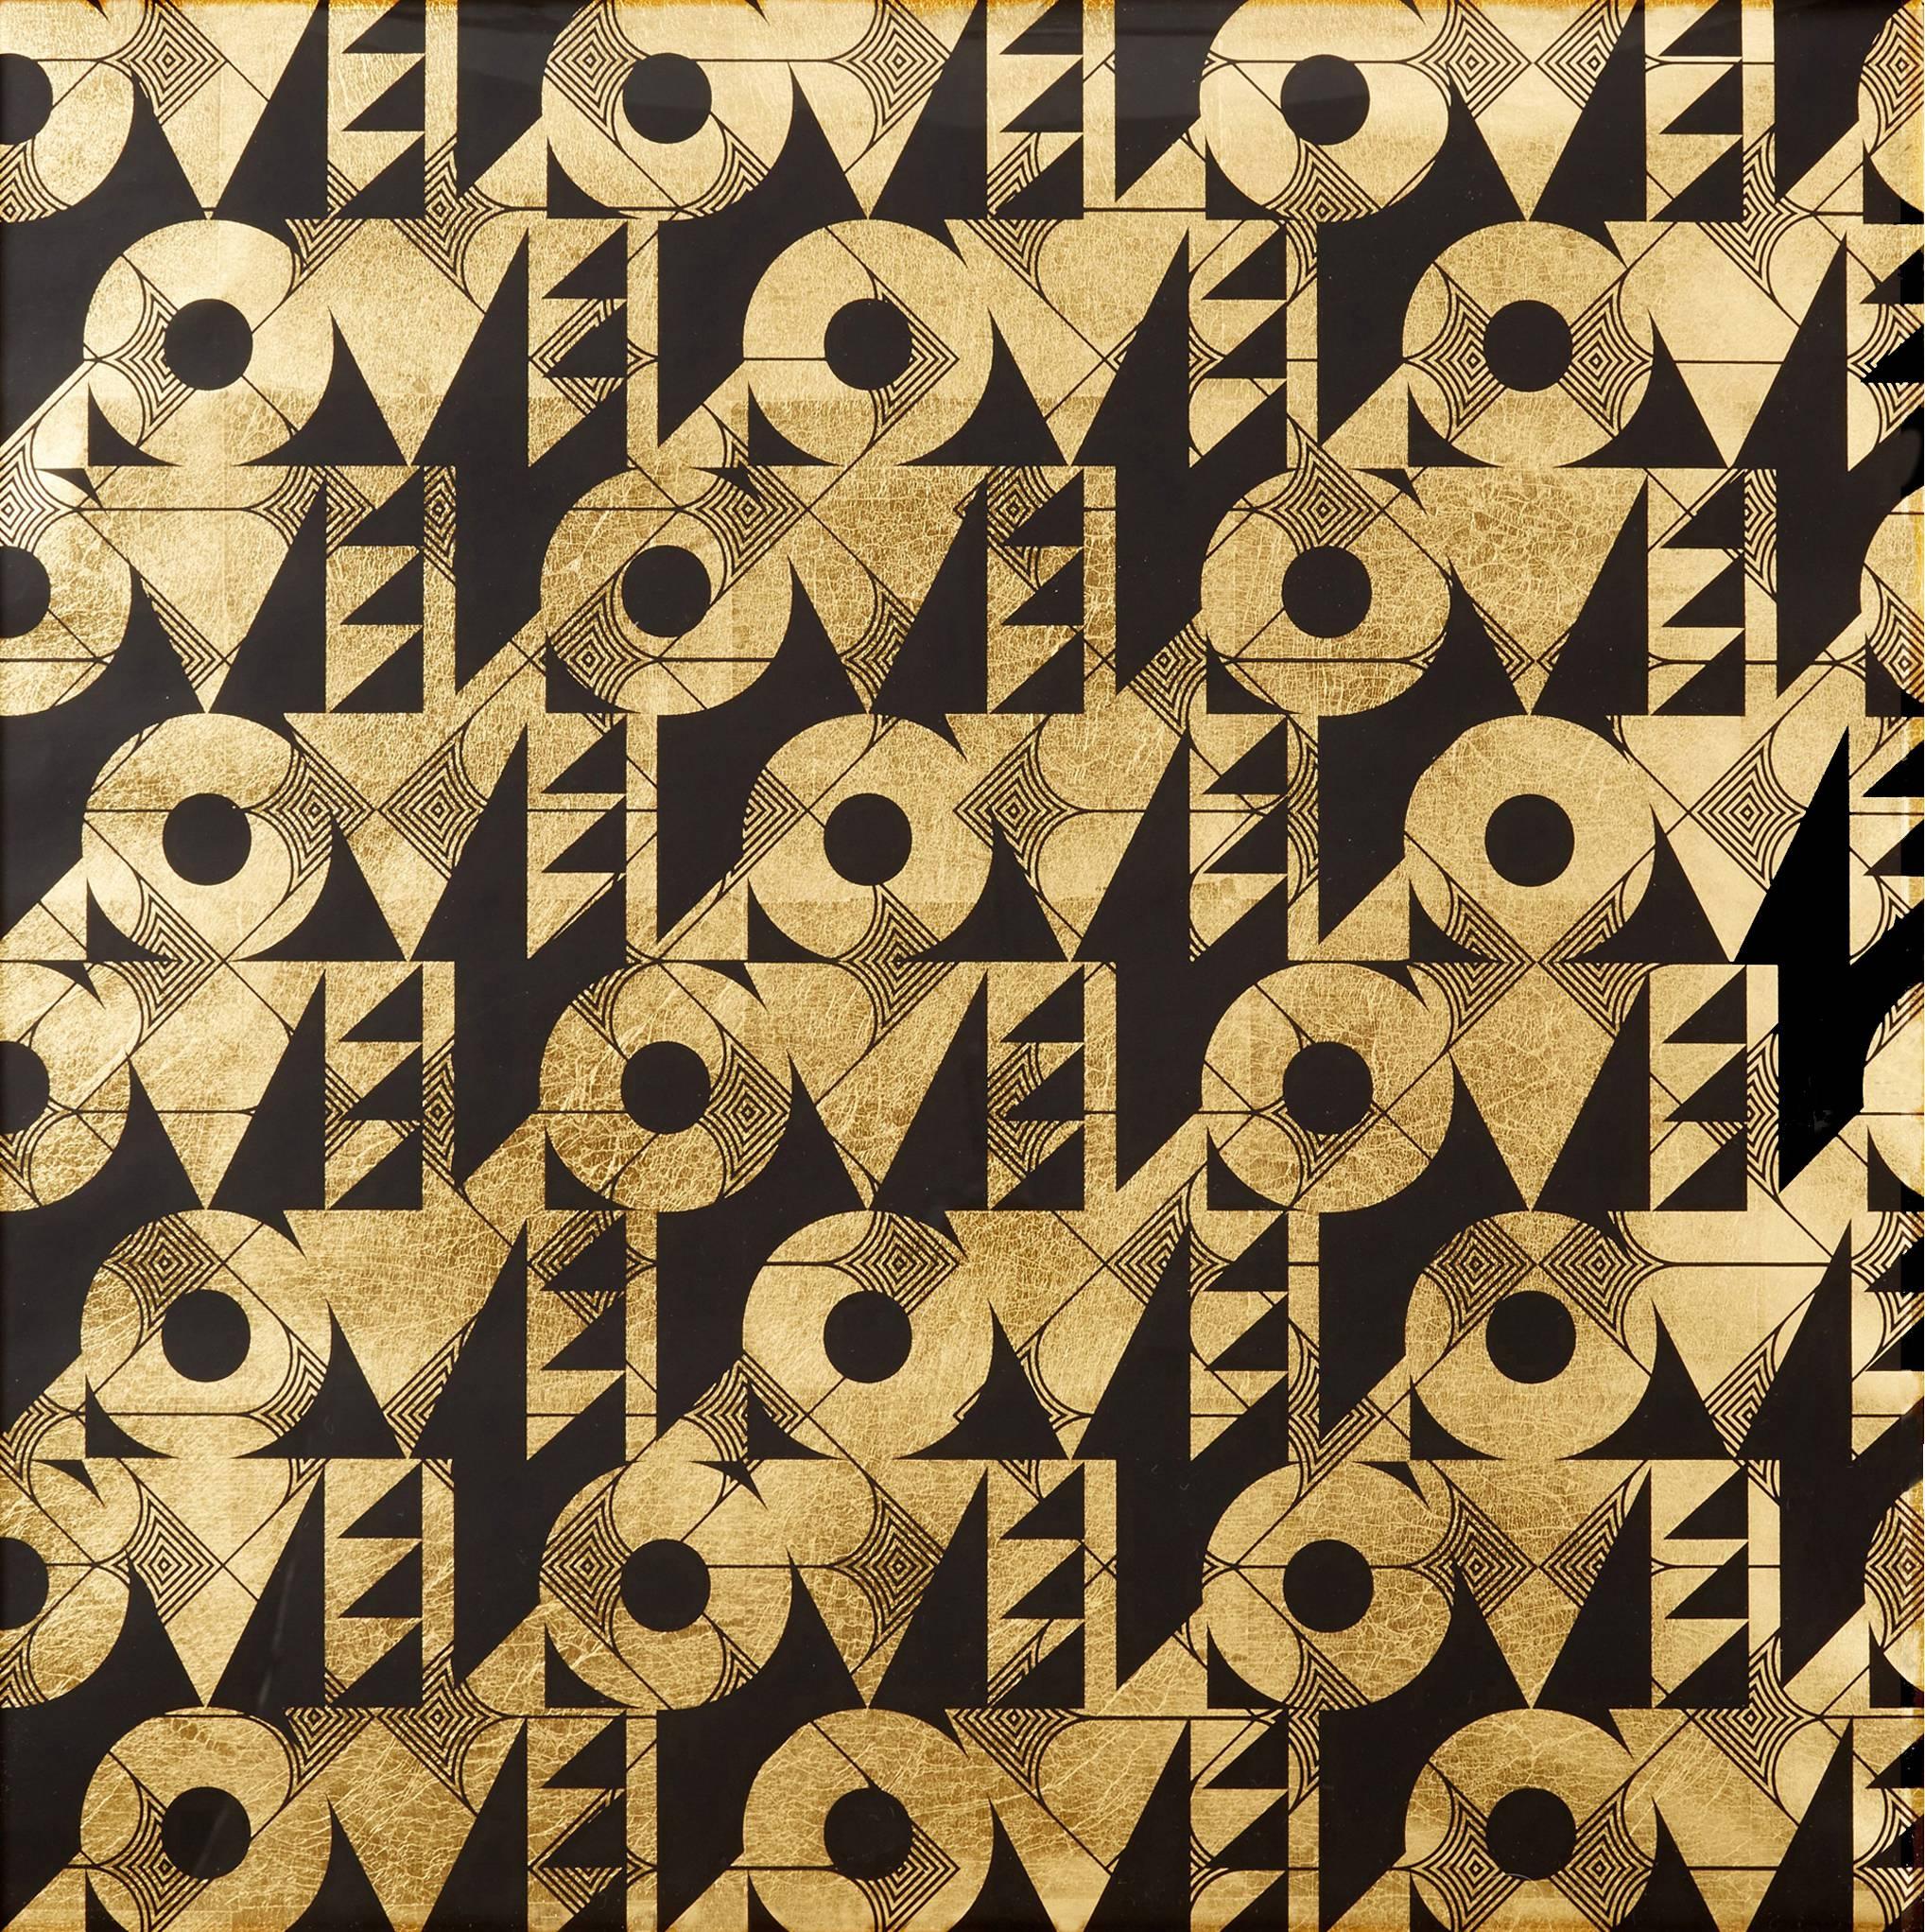 Love and Arrows (design gold black metallic work on paper patterns Art Deco) - Mixed Media Art by Lisa Hunt